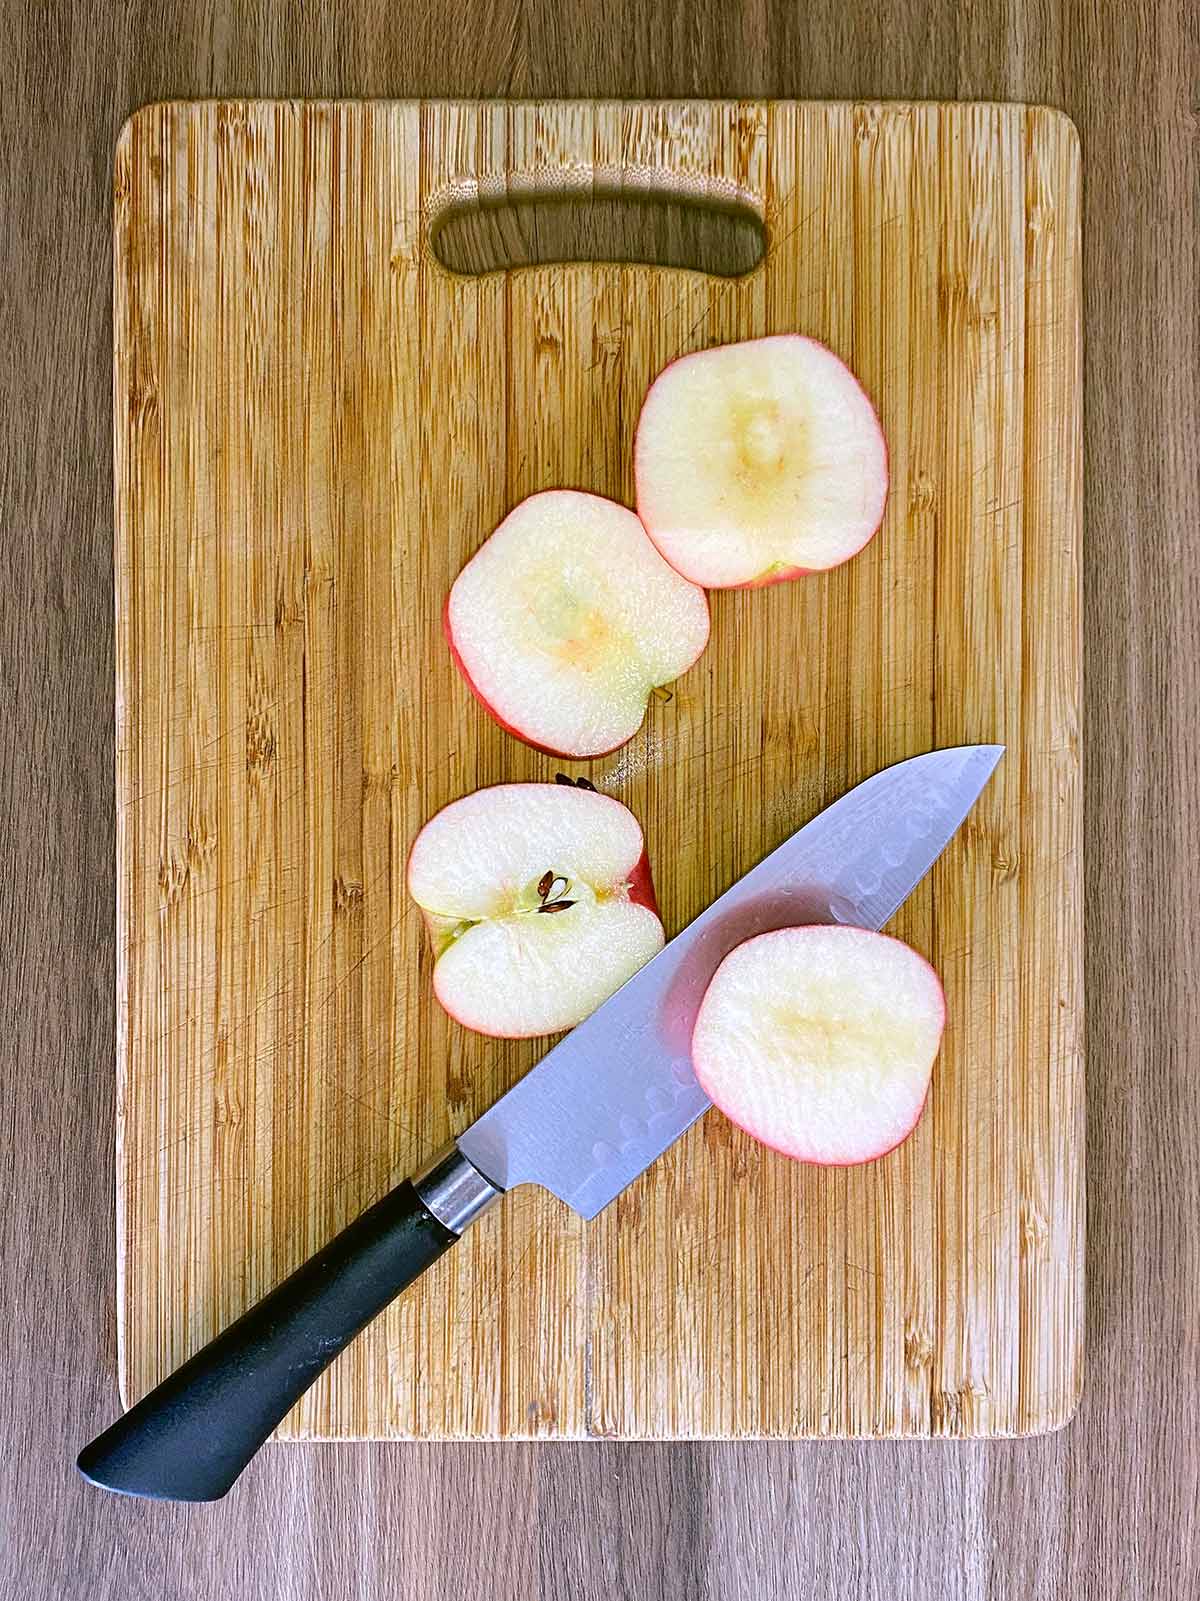 A wooden chopping board with a sliced apple and a chef's knife on it.